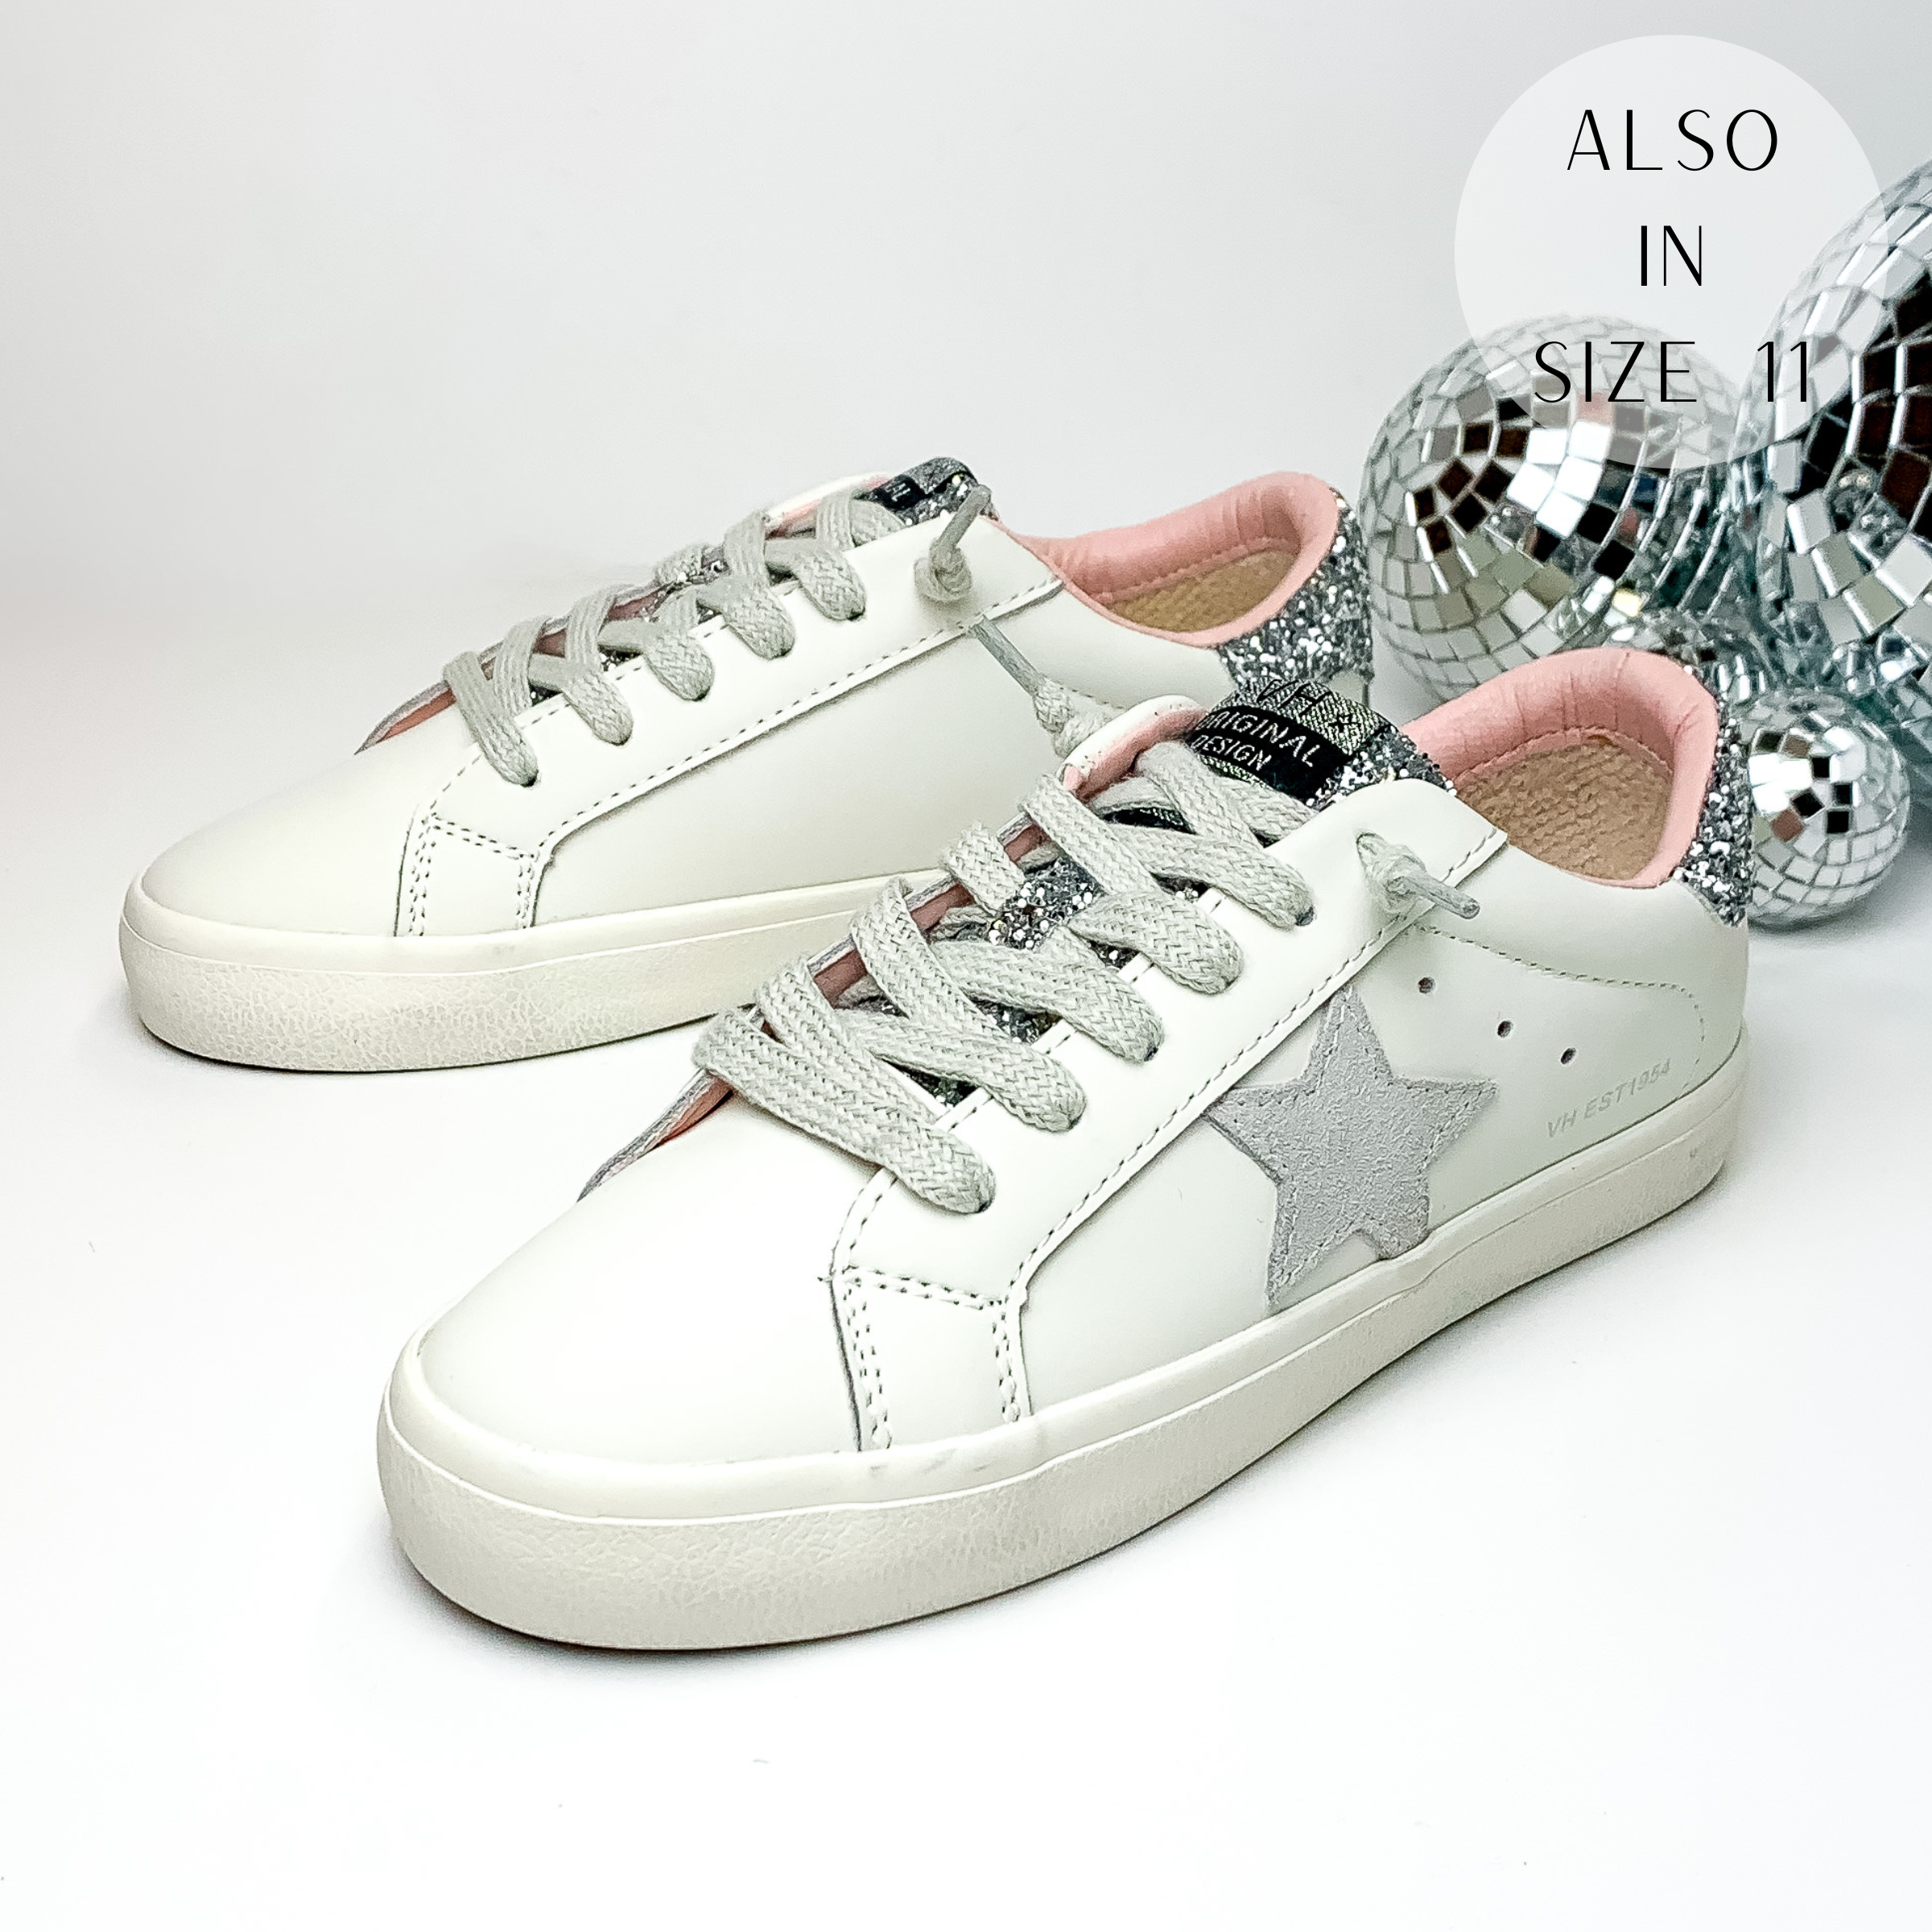 White tennis shoes with silver glitter on the tongue and on the back of the heel. These shoes also have a light grey star emblem on the side of the shoe. These shoes are pictured on a white background with disco balls behind them on the right hand side.